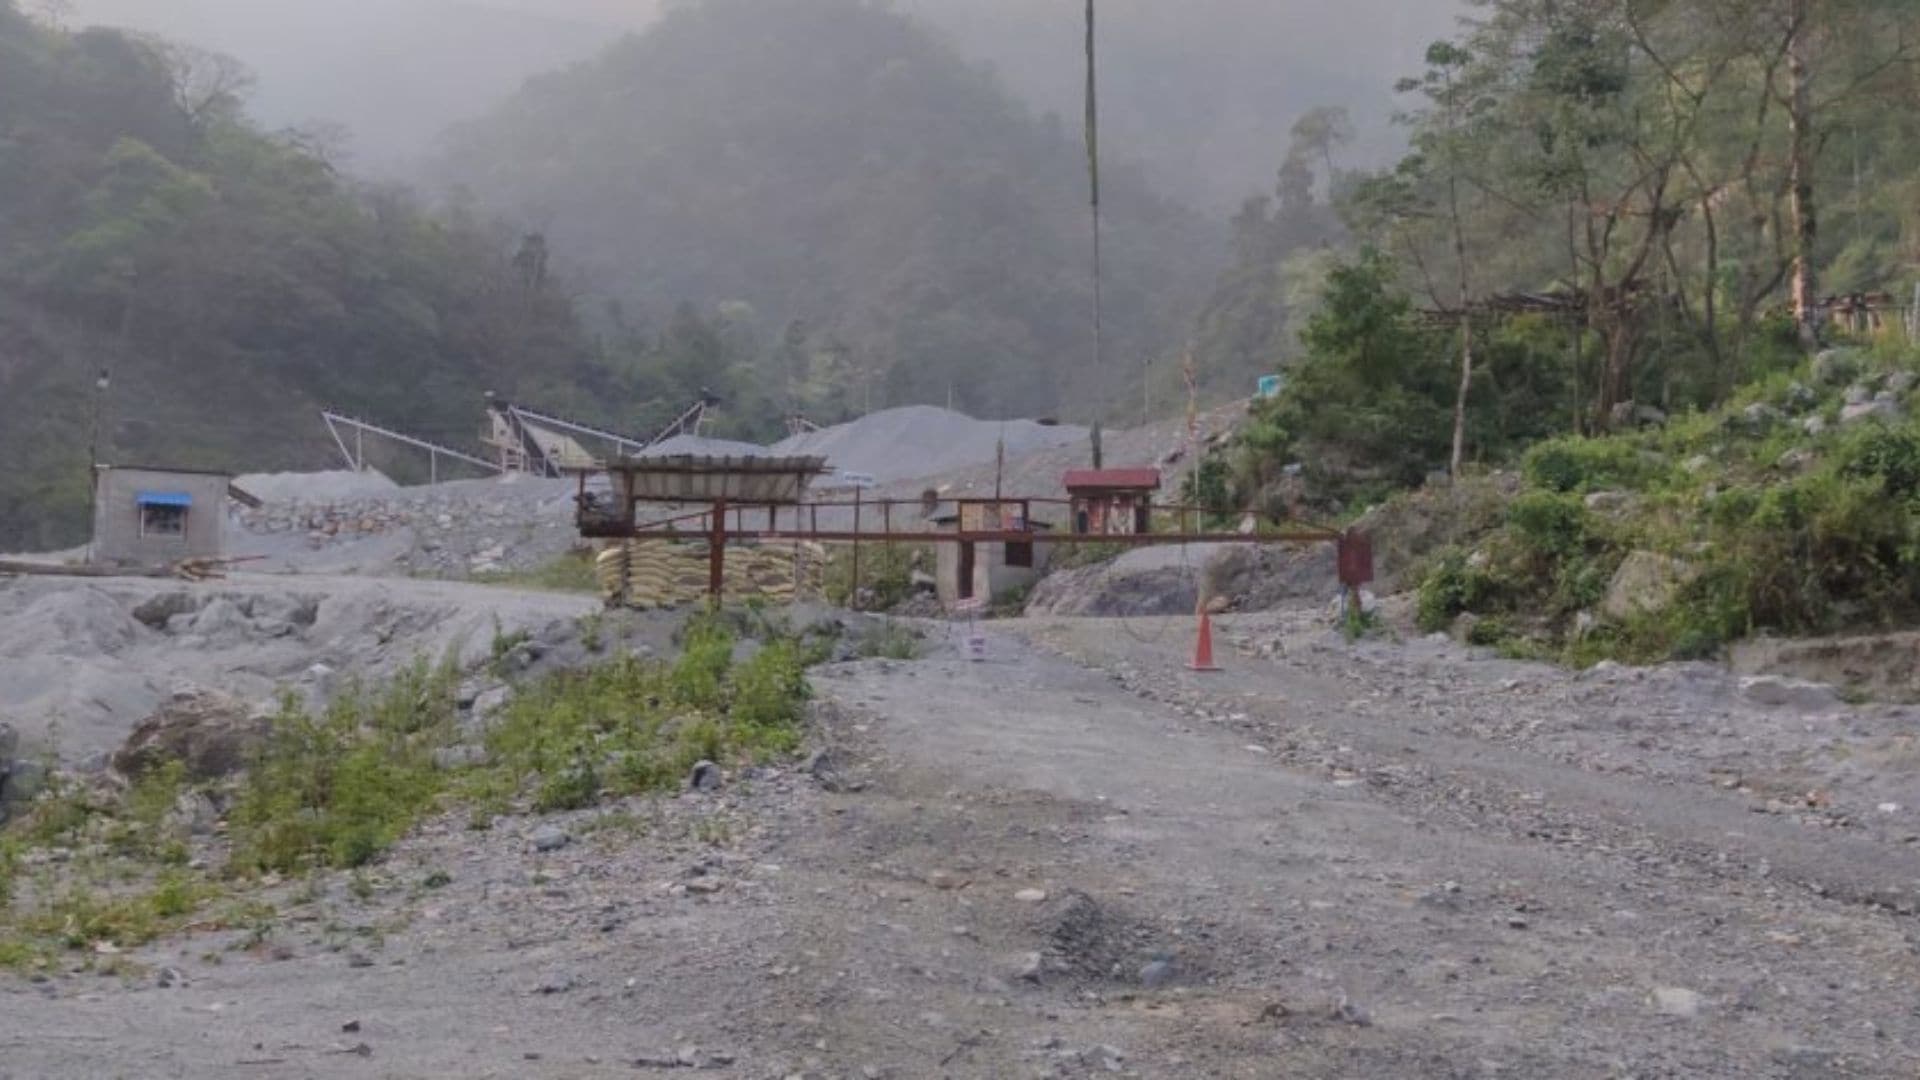 On the India-Bhutan border, an indigenous group faces extinction due to mining pollution